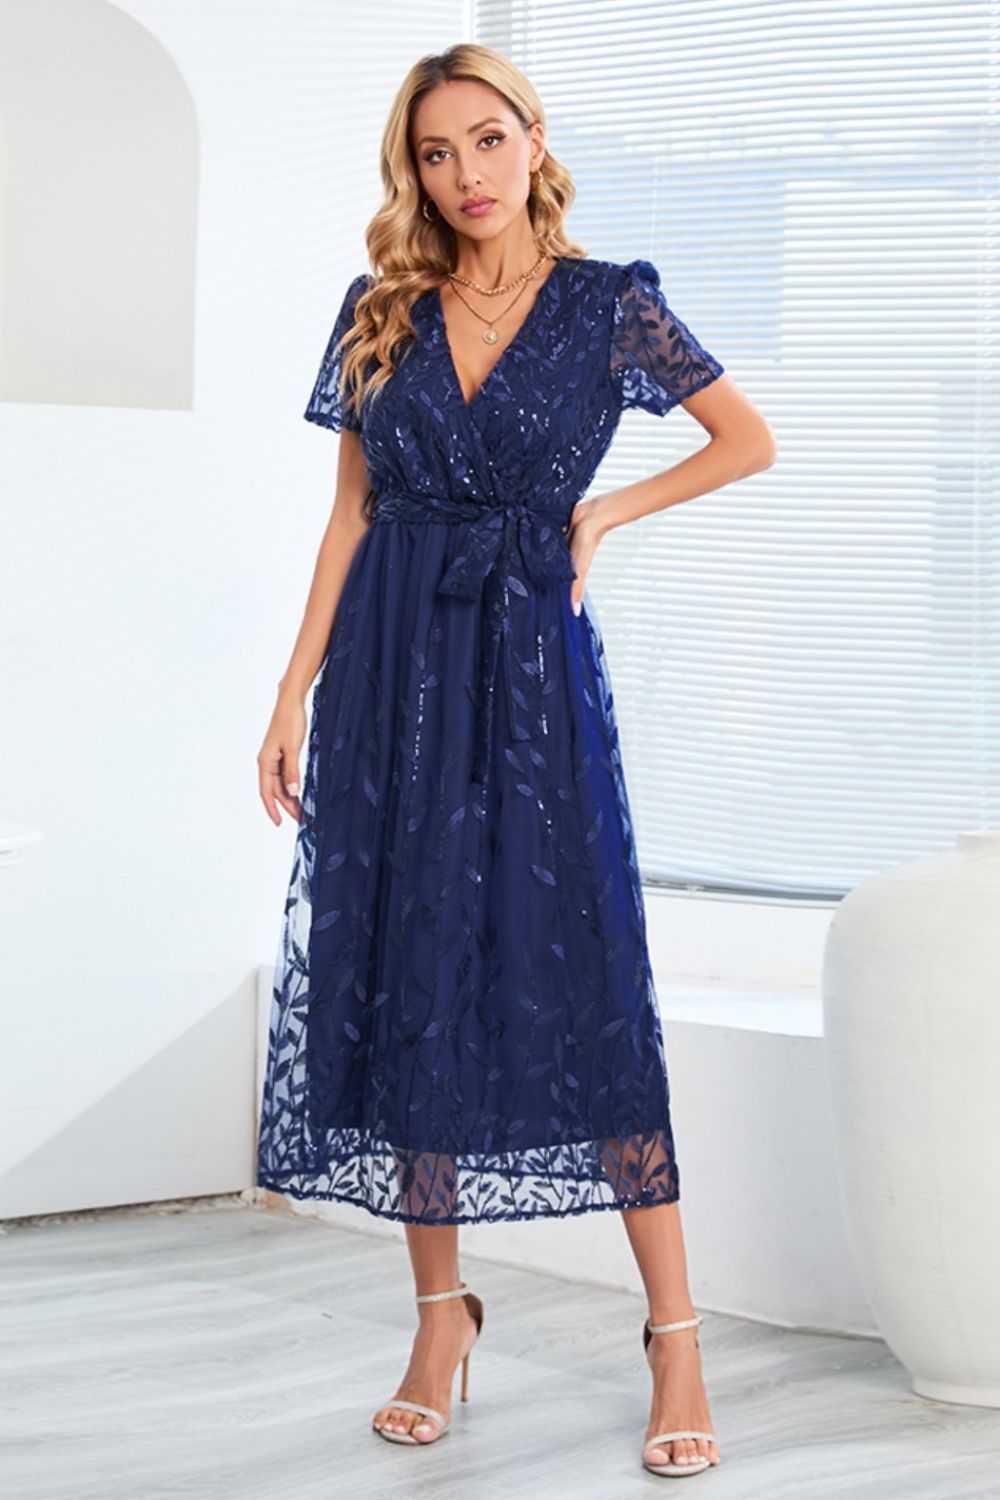 Sequin Leaf Embroidery Tie Front Short Sleeve Midi Dress - Cheeky Chic Boutique